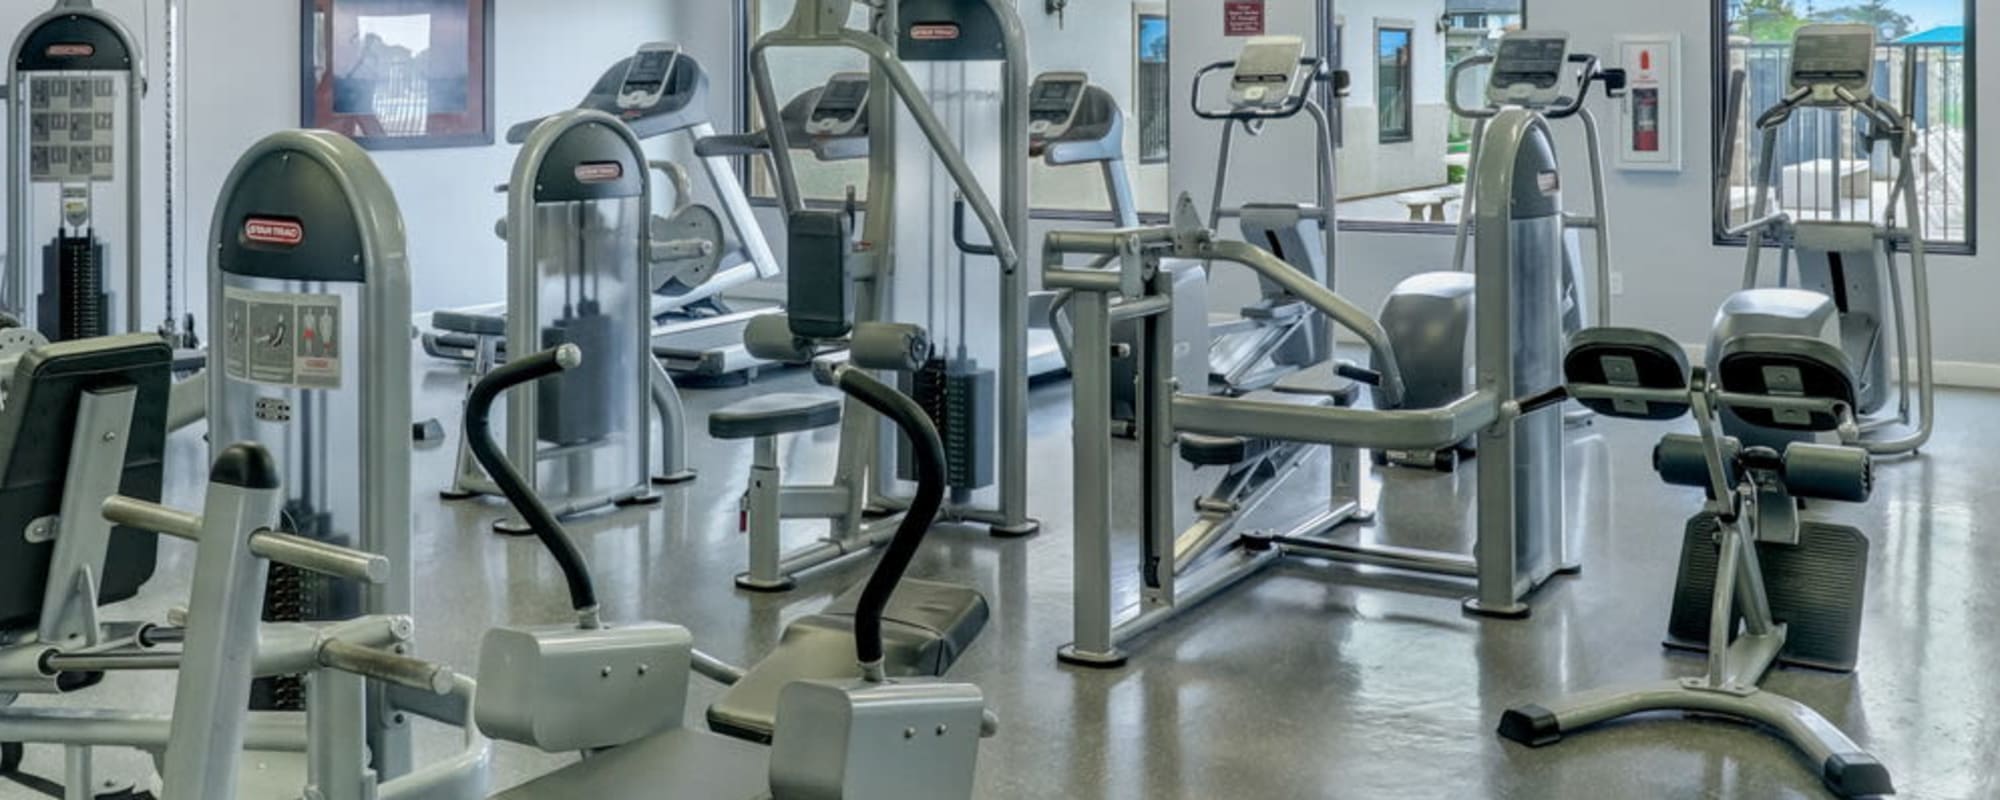 Fitness center at Wire Mountain III in Oceanside, California